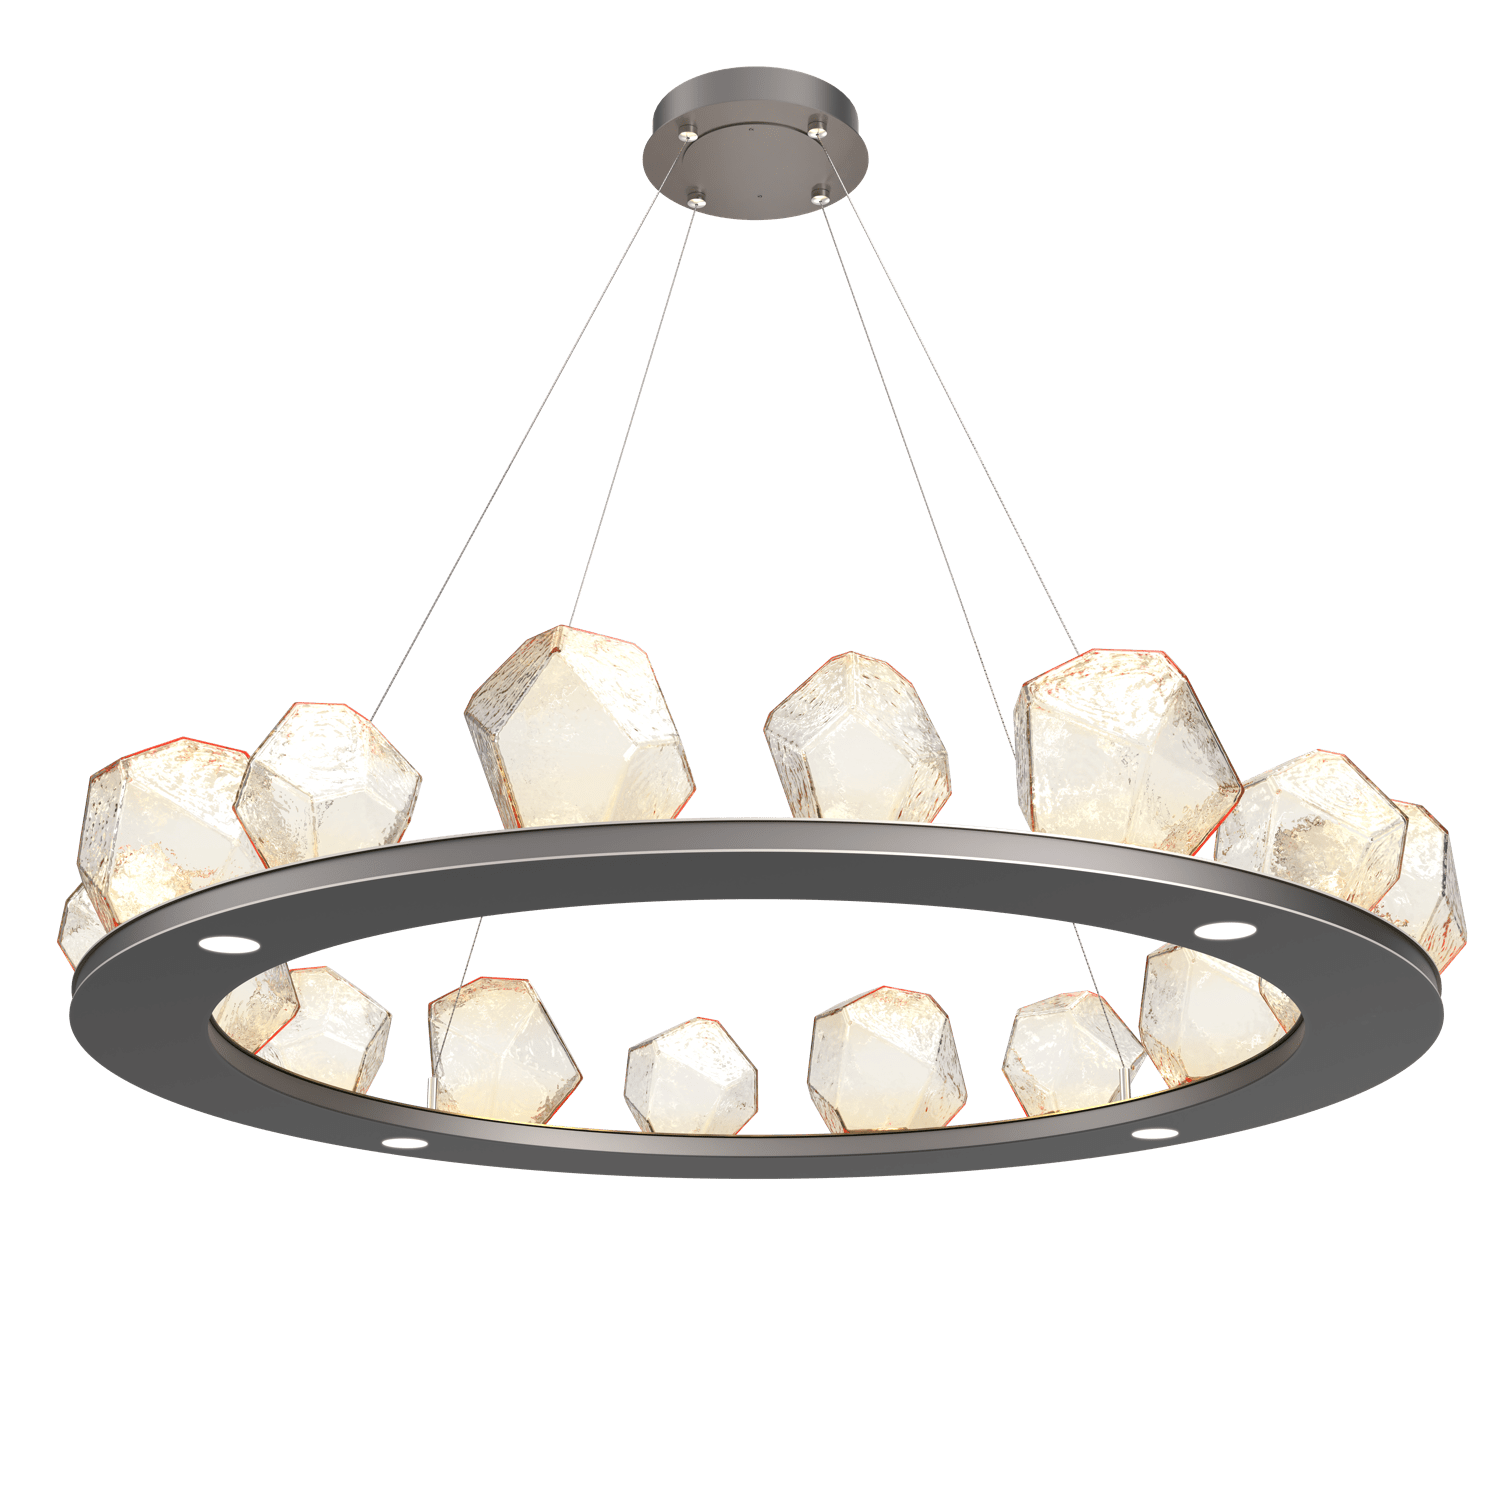 CHB0039-0D-GP-A-Hammerton-Studio-Gem-48-inch-ring-chandelier-with-graphite-finish-and-amber-blown-glass-shades-and-LED-lamping